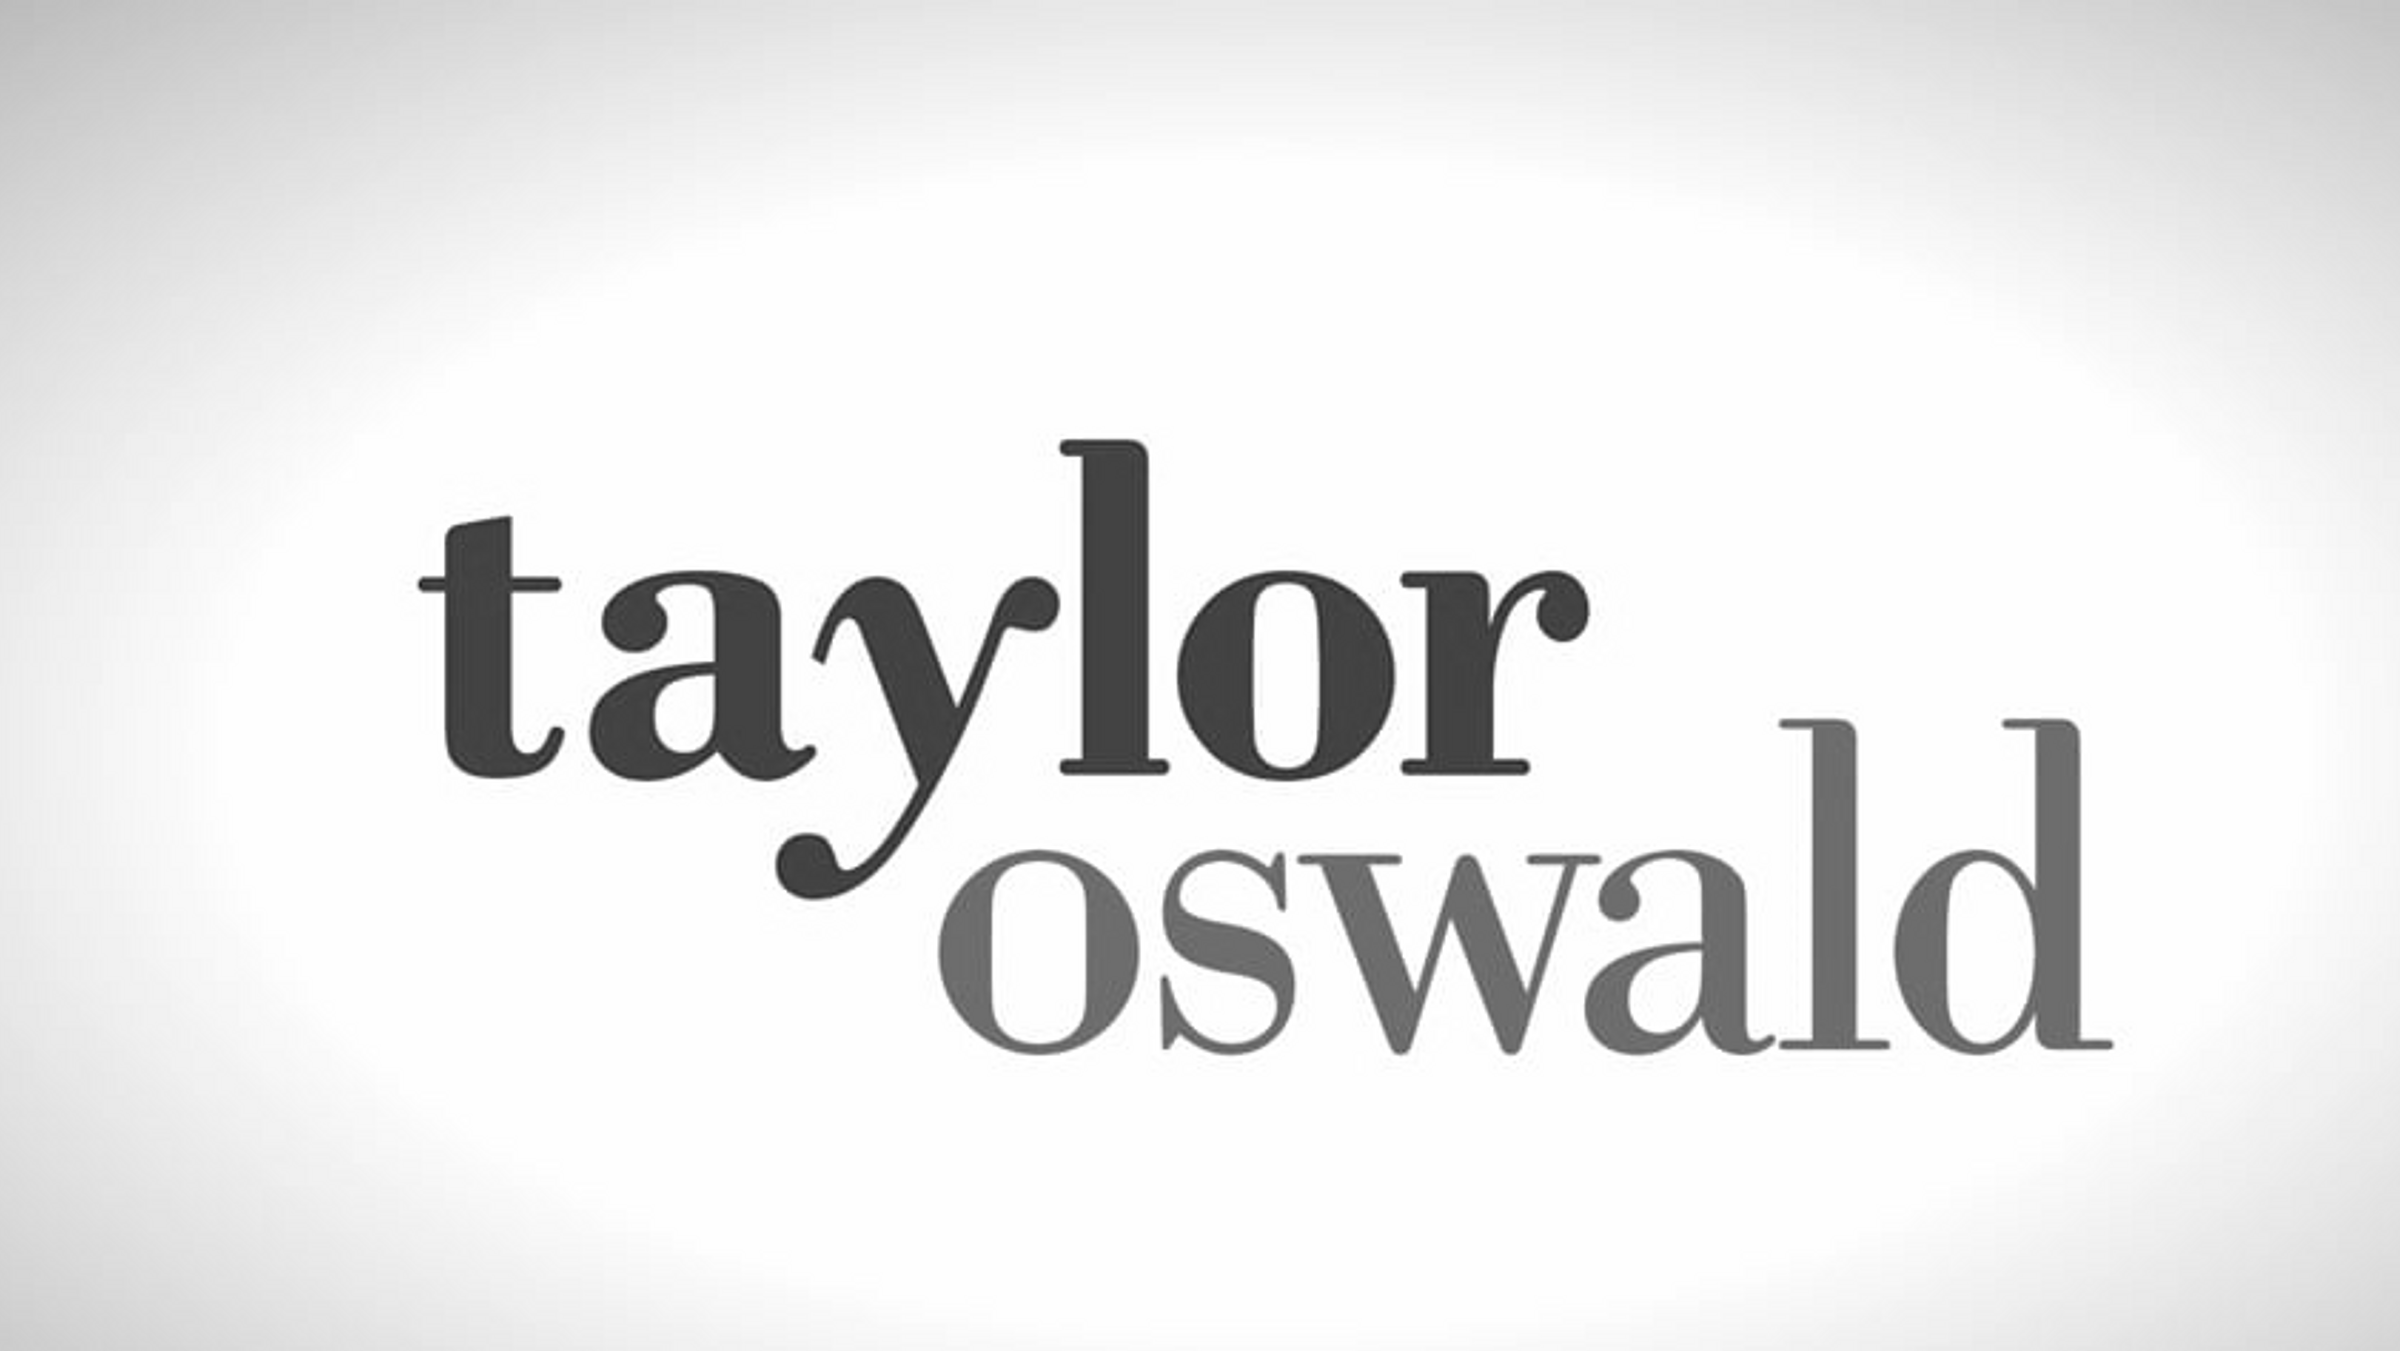 Get To Know Taylor Oswald